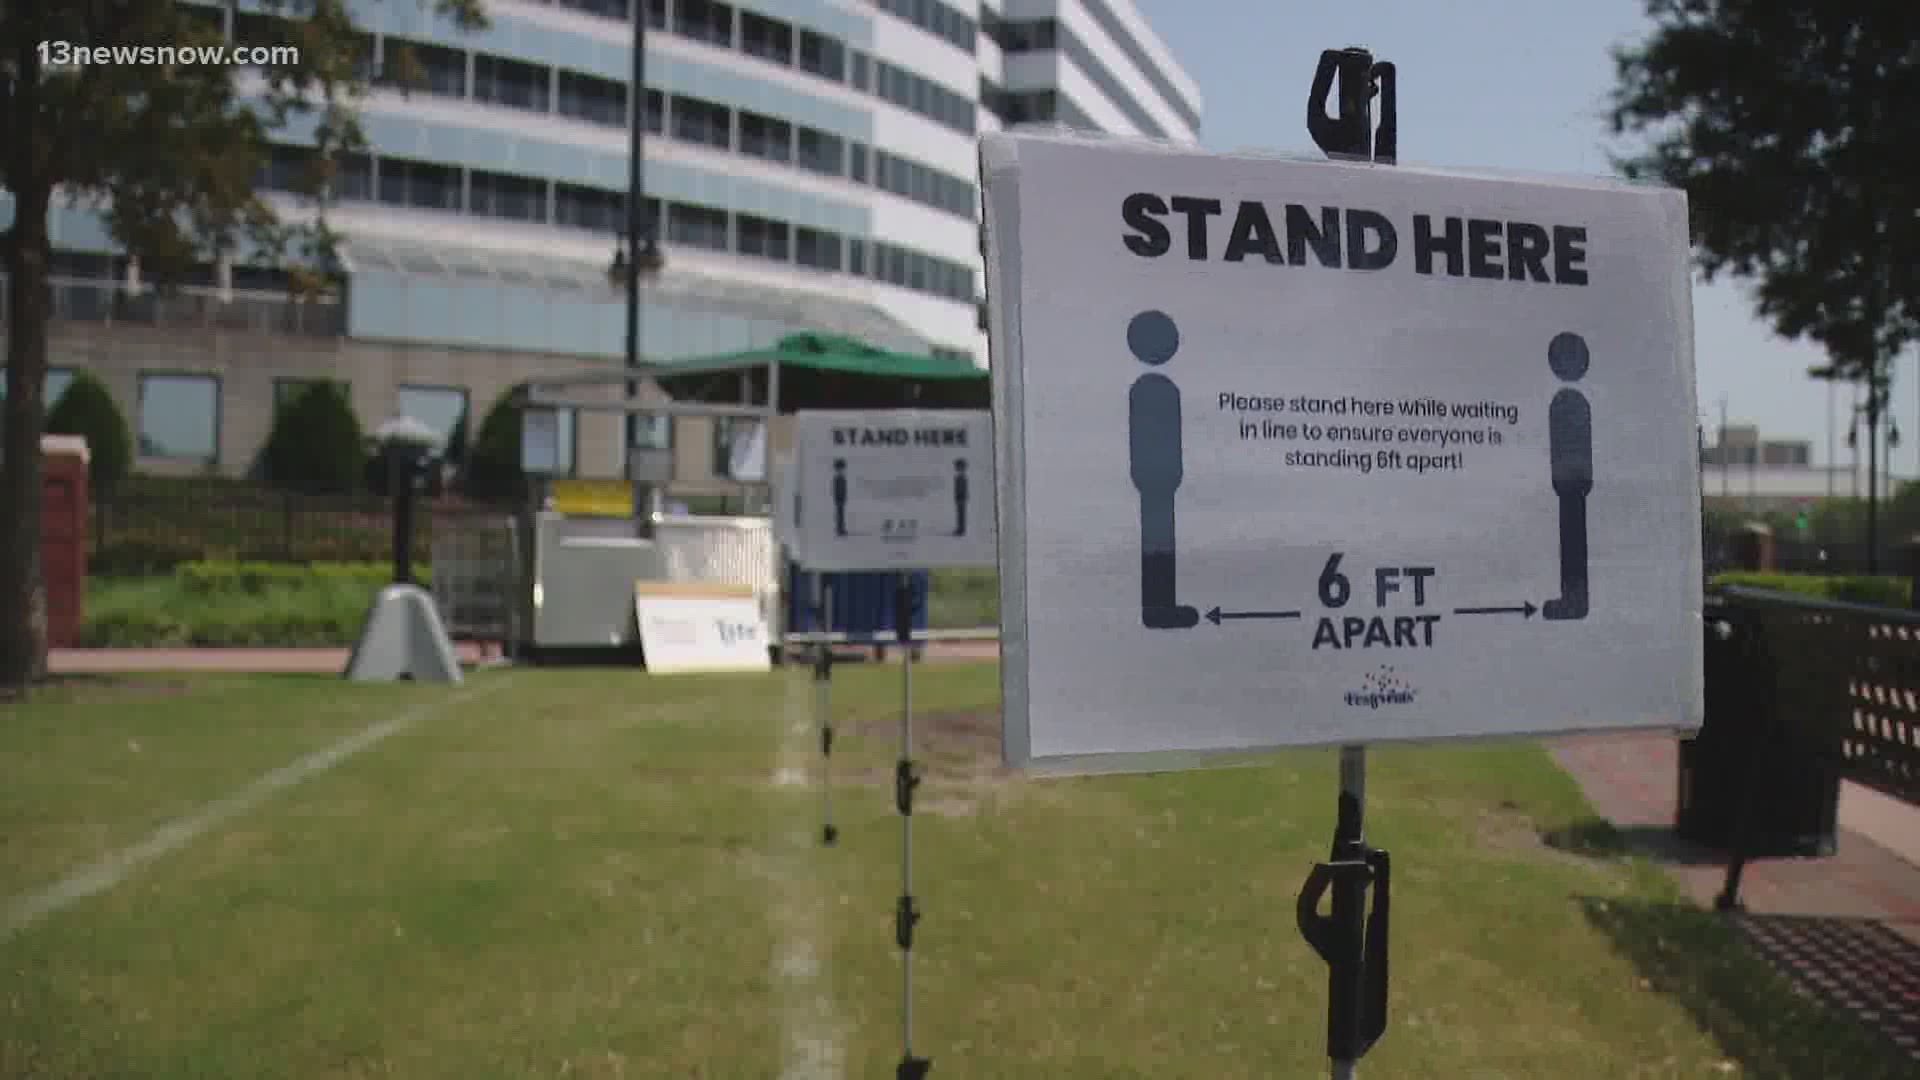 Staff recently set up at Town Point Park to figure out how to safely put on an event, despite the pandemic.